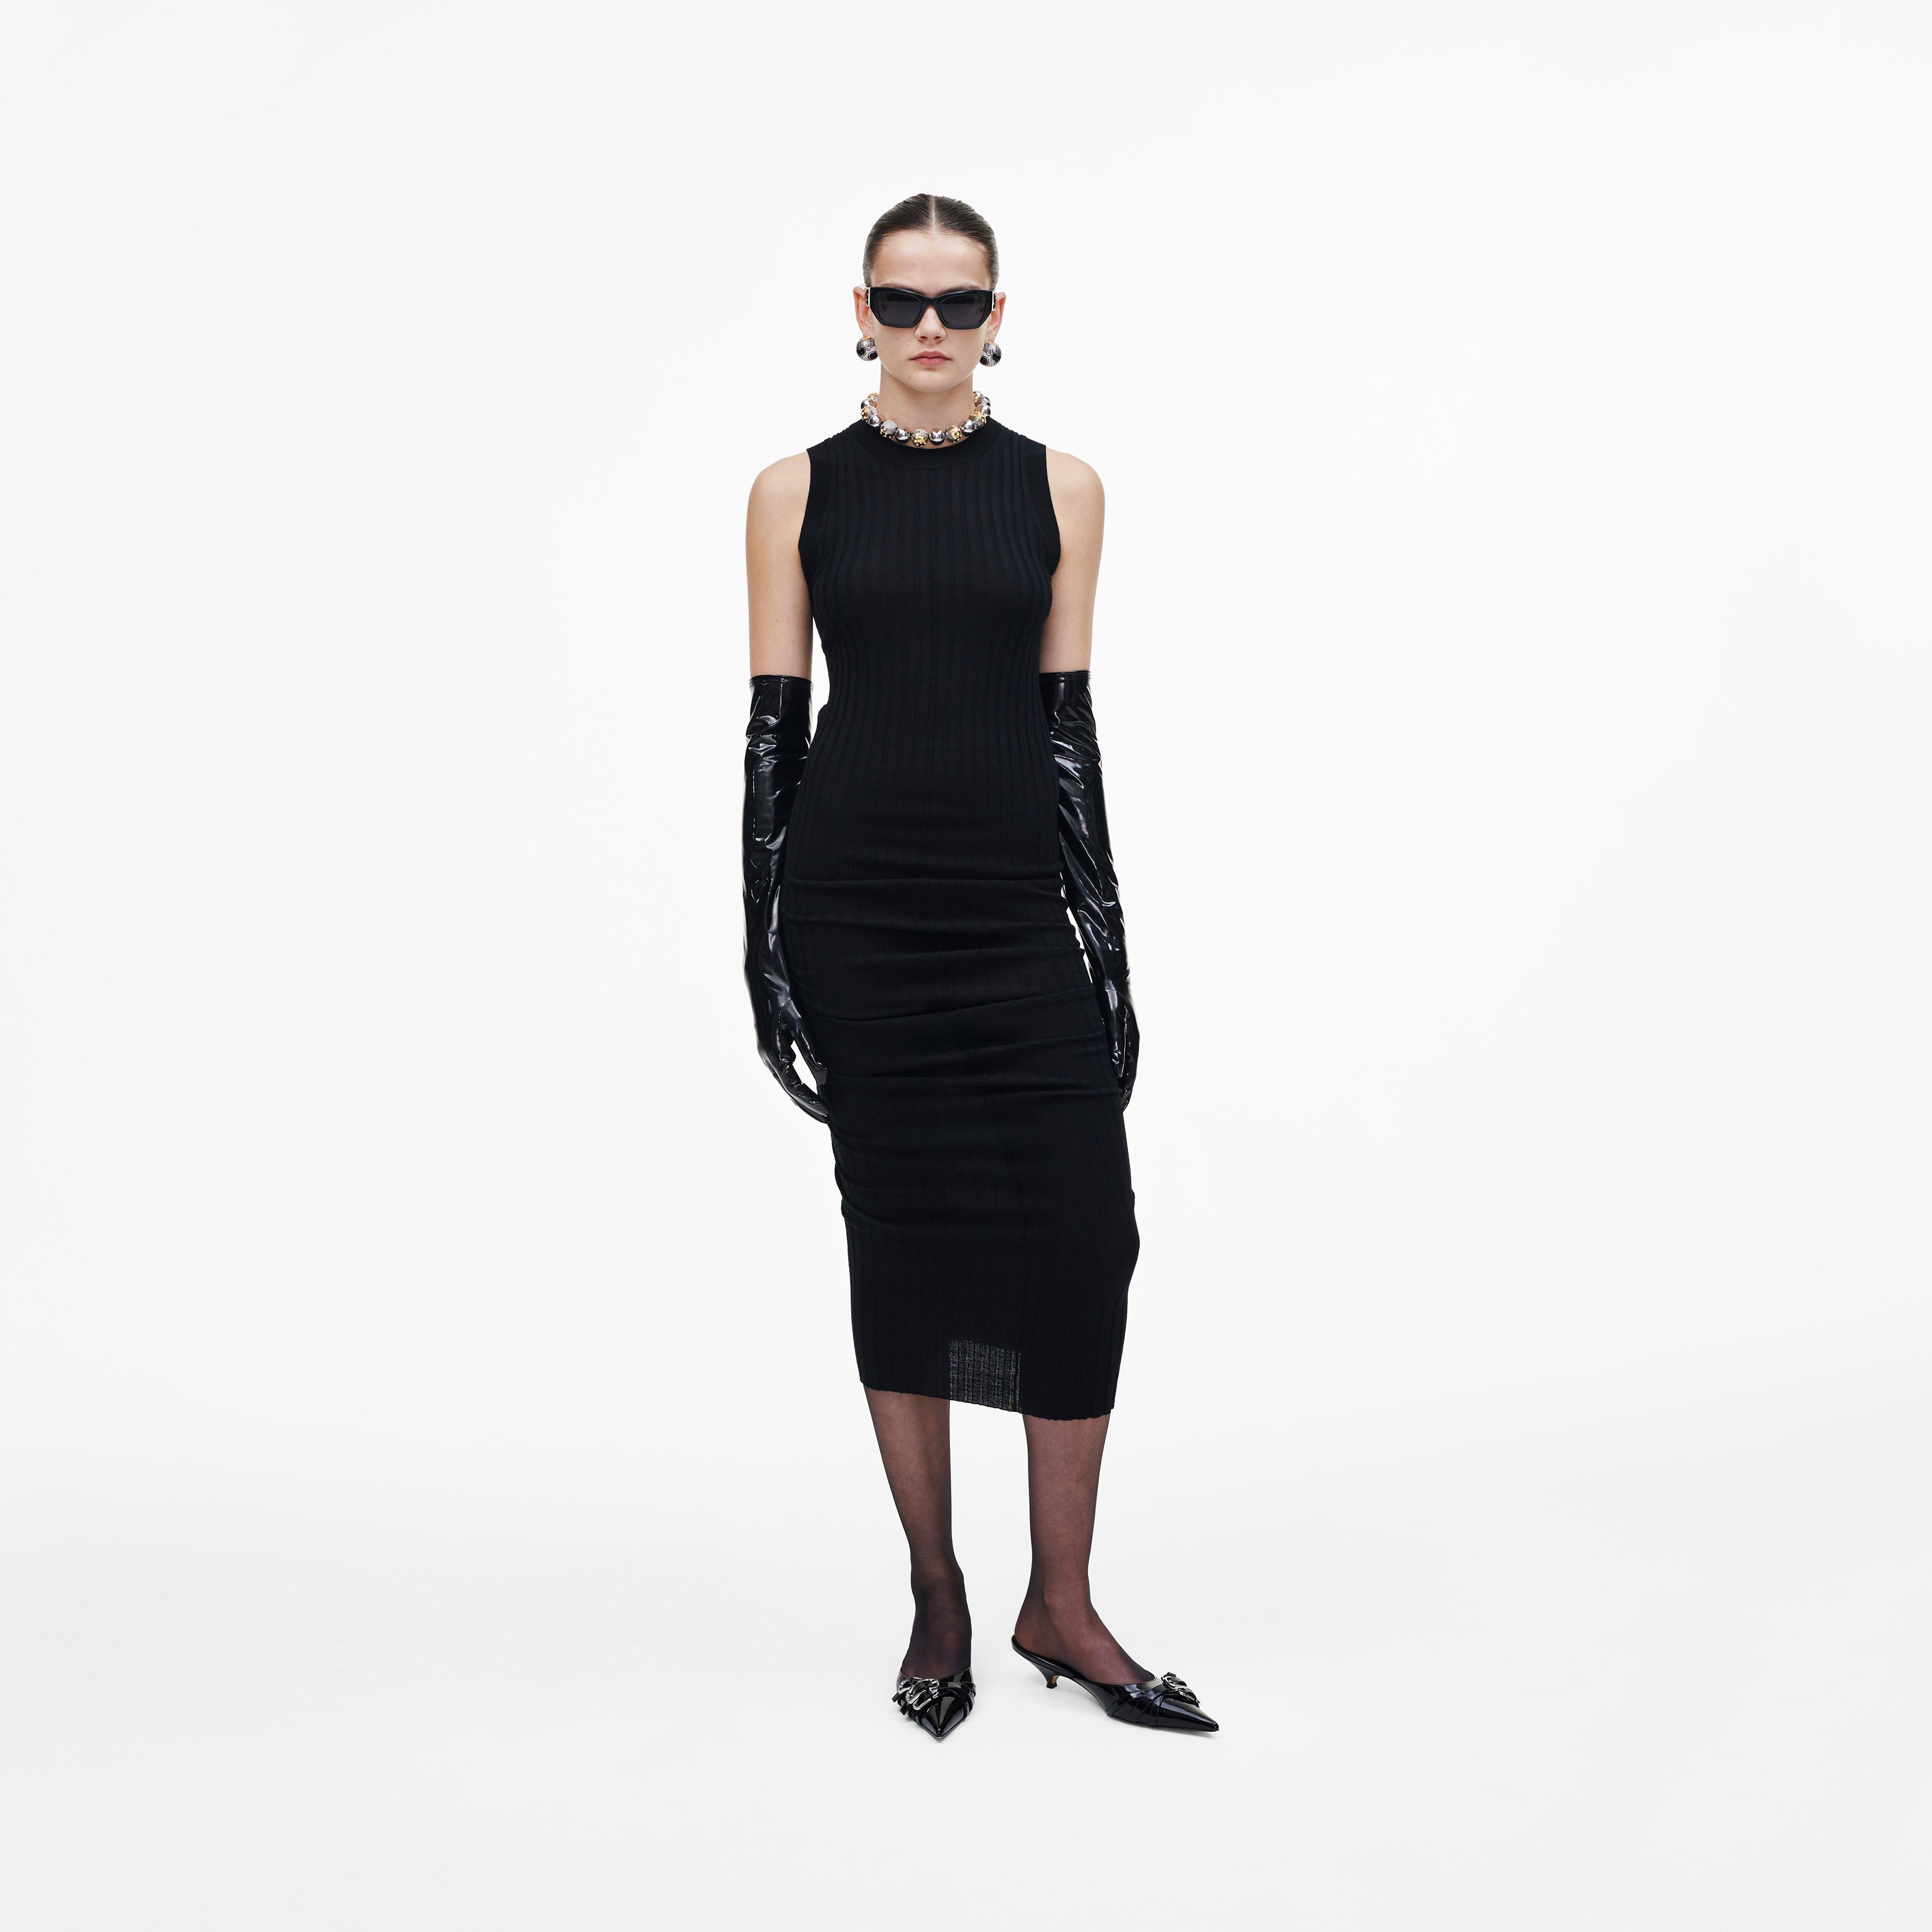 Marc by Marc jacobs Fine Ribbed Merino Twisted Dress,BLACK